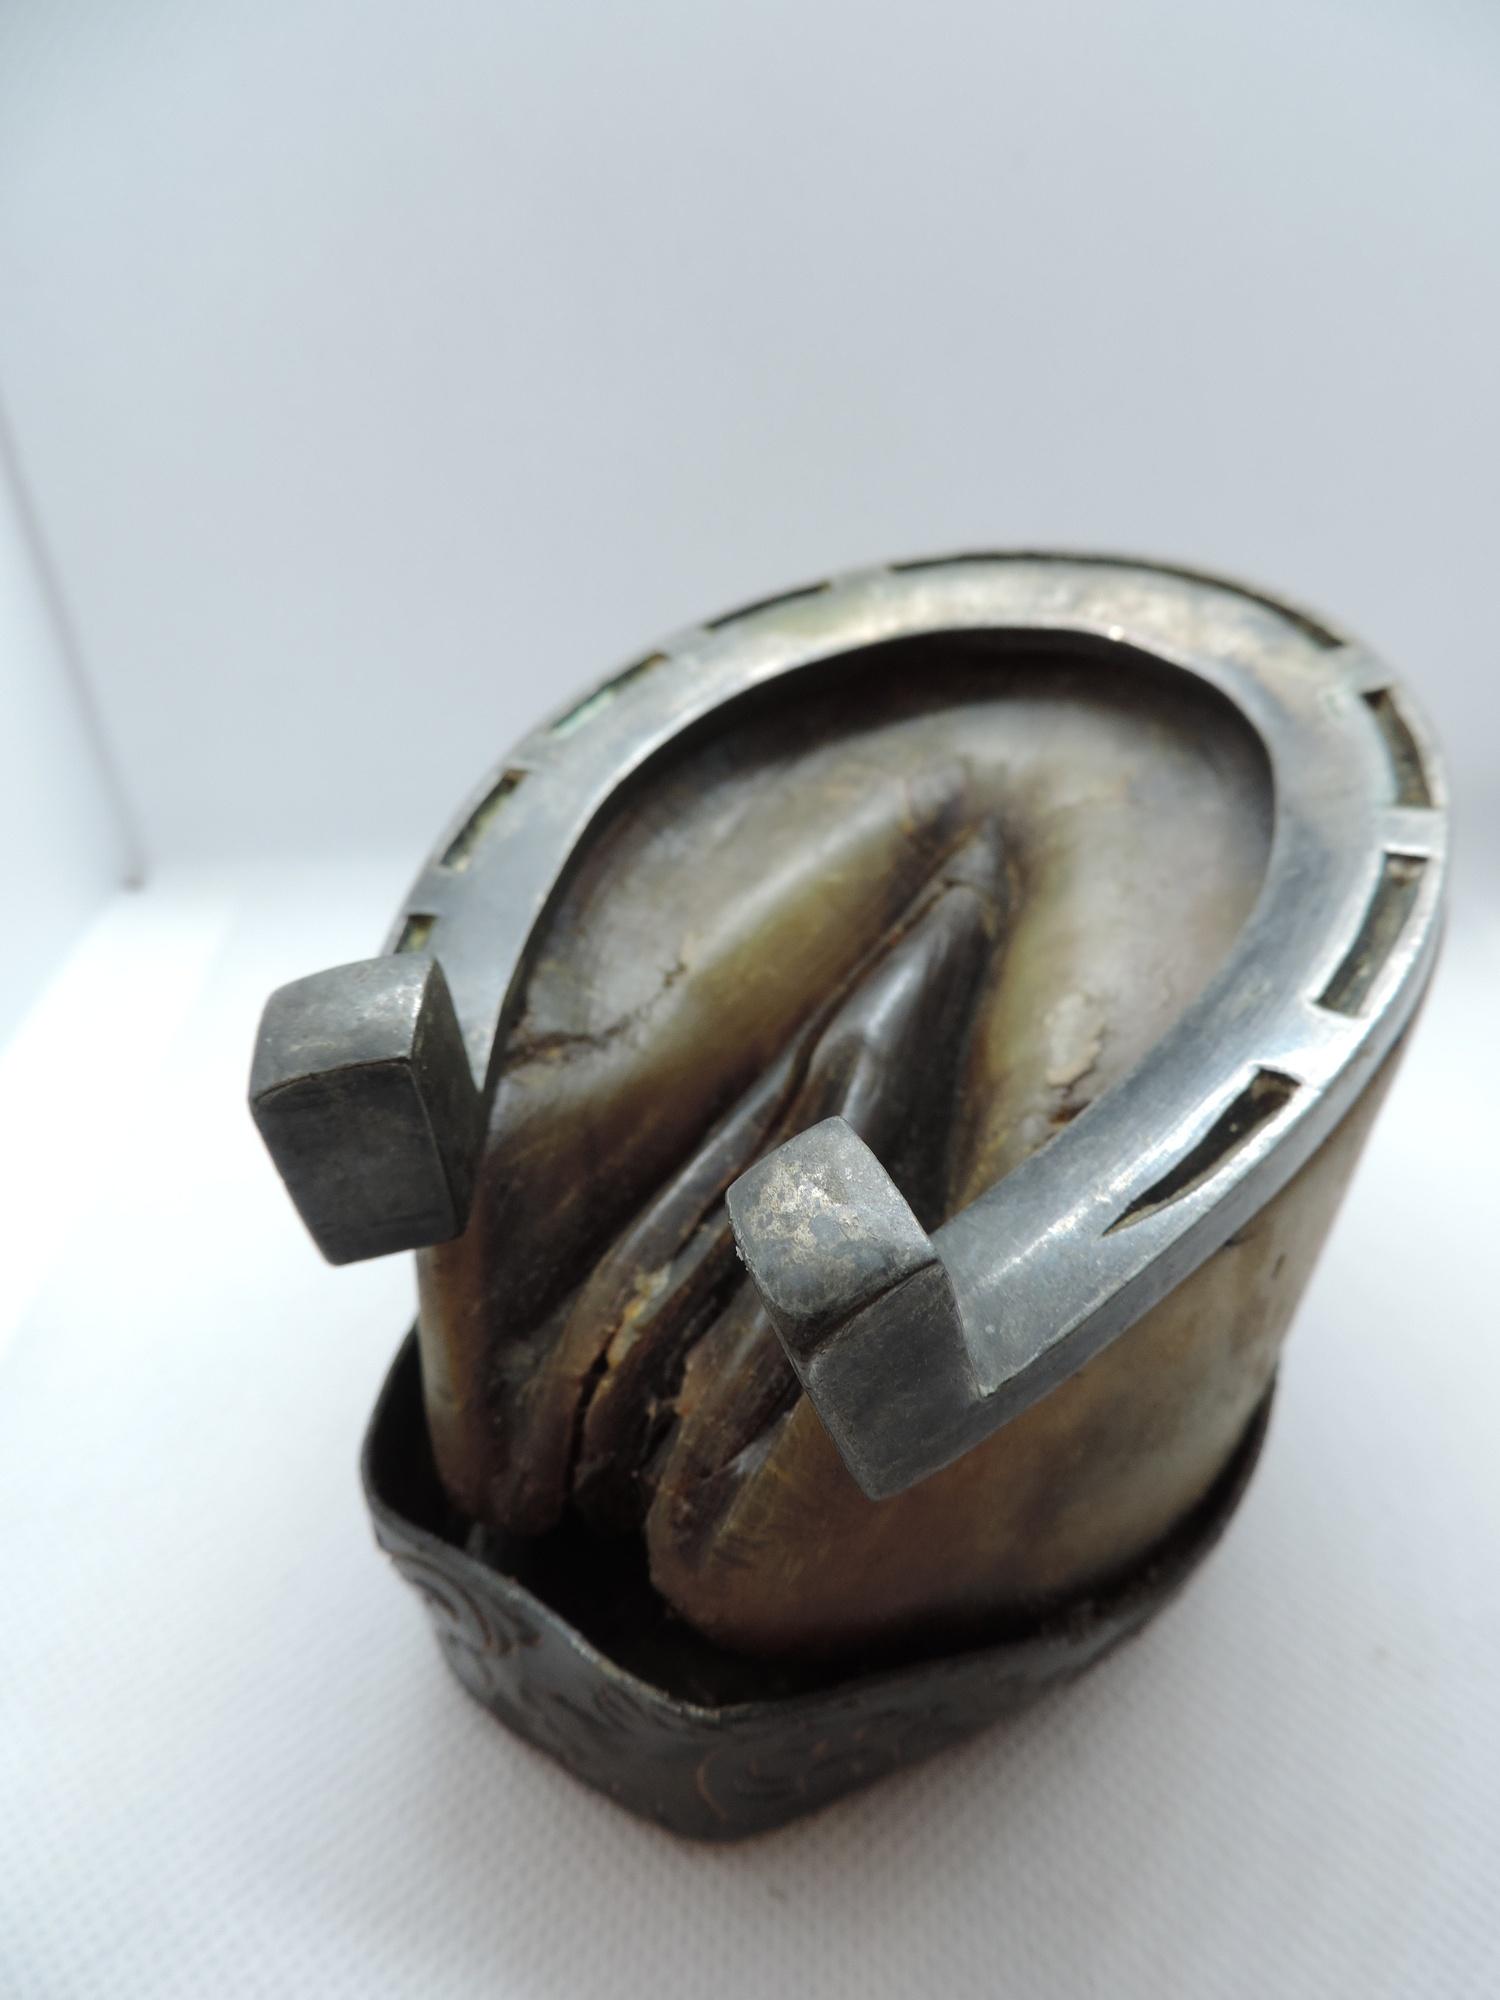 Horses Hoof Inkwell with Engraved White Metal Decoration - Image 4 of 5